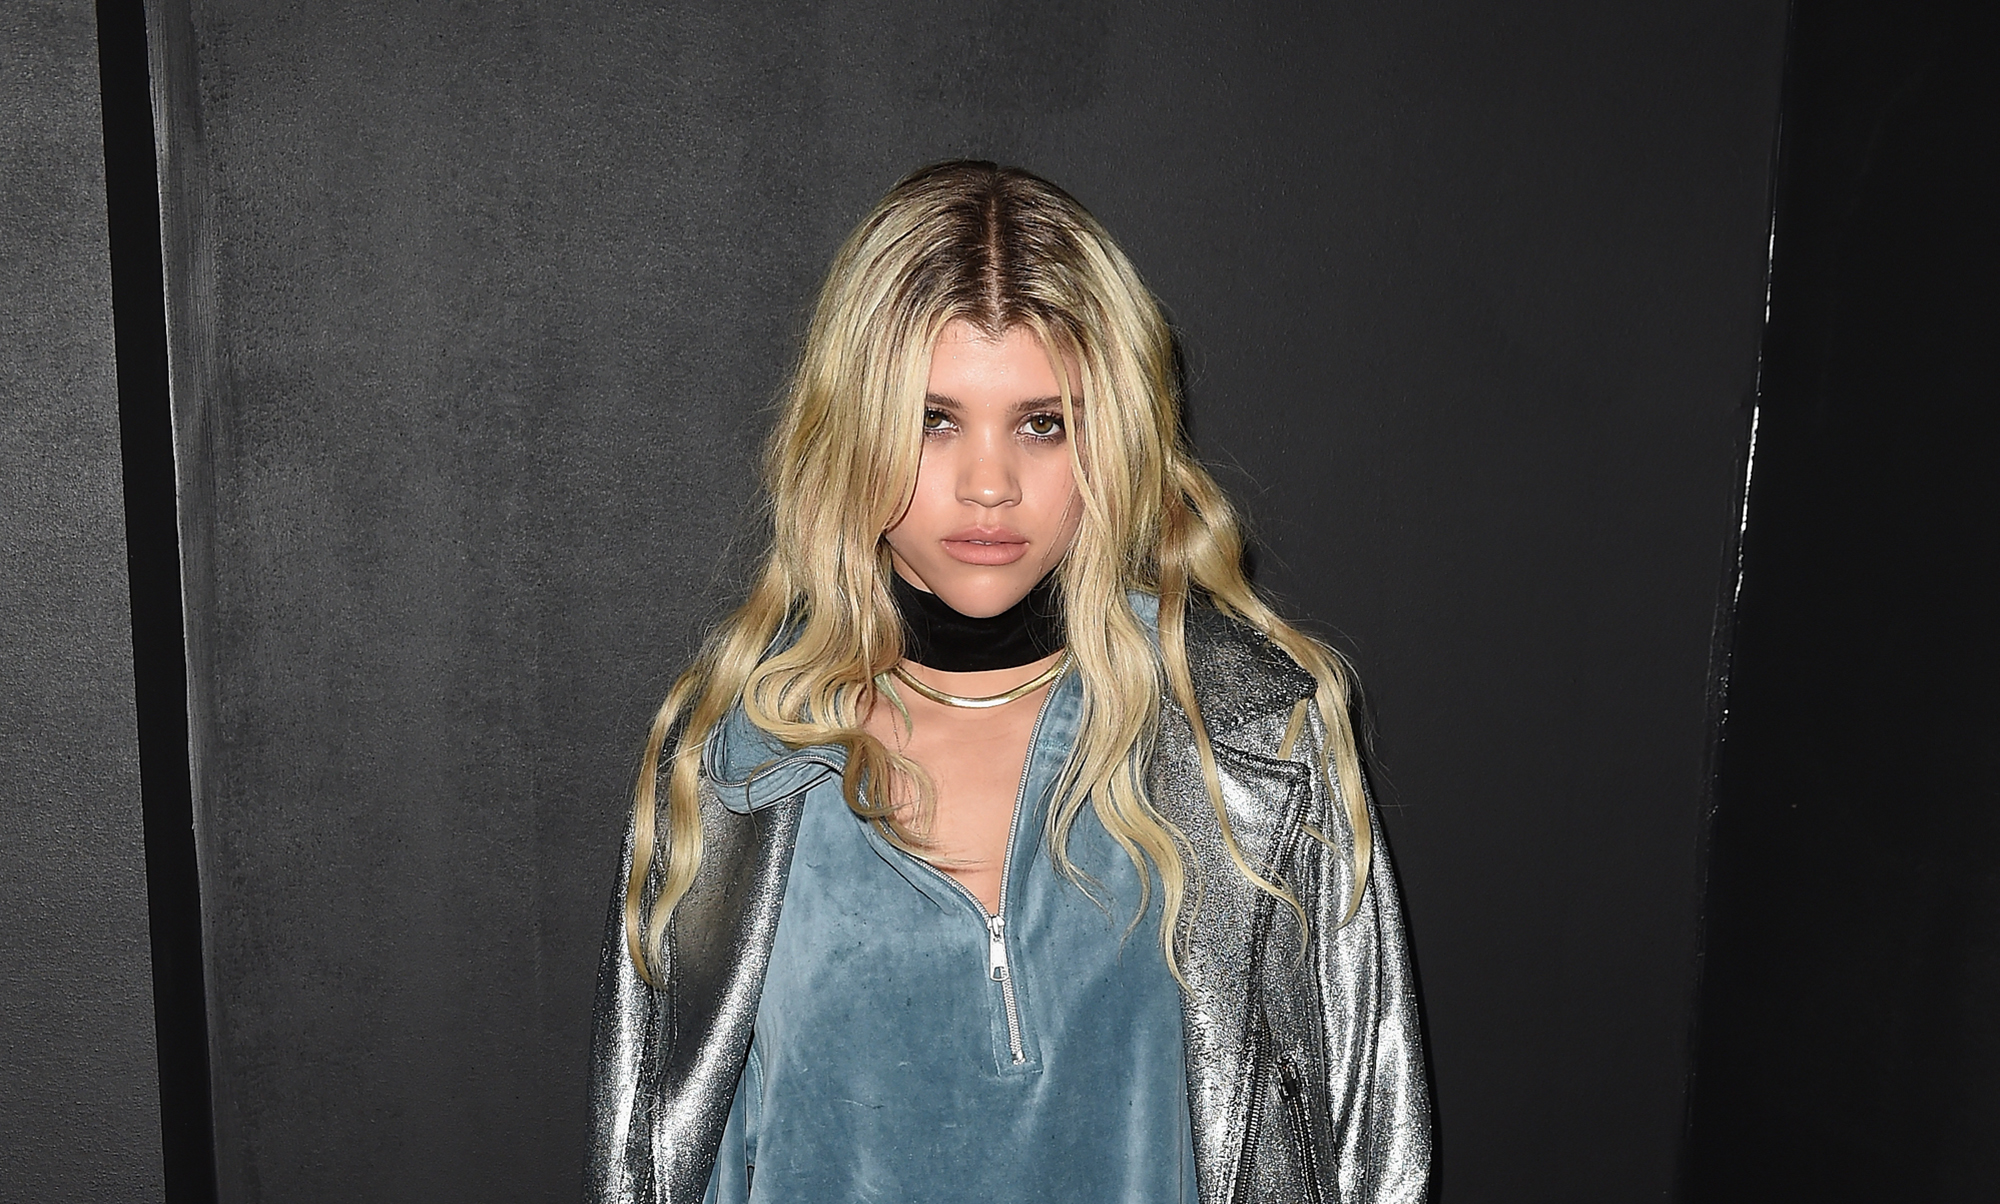 Sofia Richie attends the Balmain and Olivier Rousteing after the Met Gala Celebration on May 02, 2016 in New York, New York.  (Photo by Nicholas Hunt/Getty Images for Balmain) (Nicholas Hunt&mdash;Getty Images for Balmain)